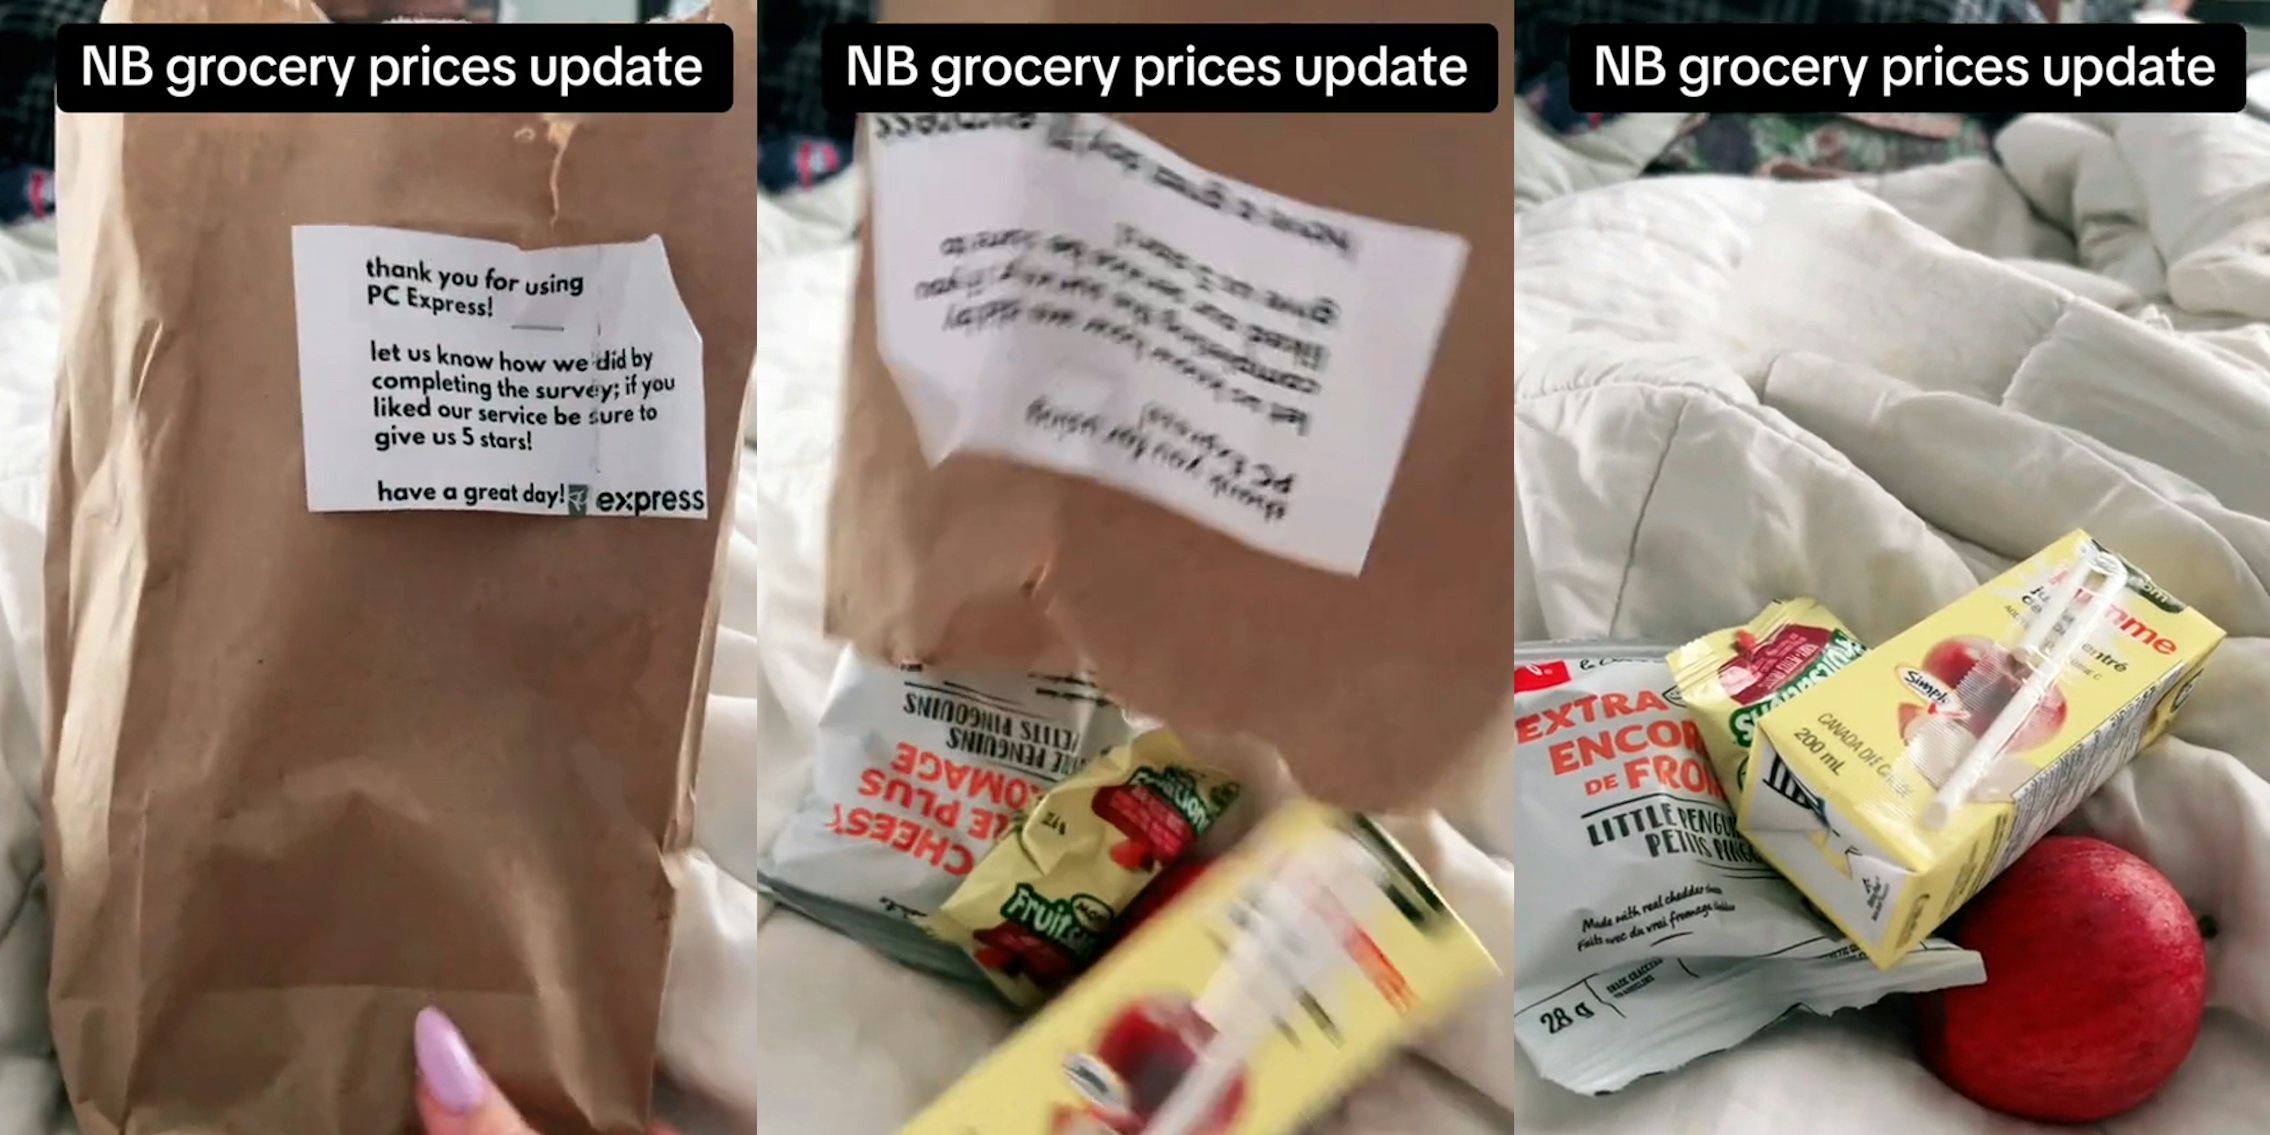 packed lunch in bag with caption 'NB grocery prices update' (l) packed lunch items falling out of bag with caption 'NB grocery prices update' (c) lunch items on bed with caption 'NB grocery prices update' (r)